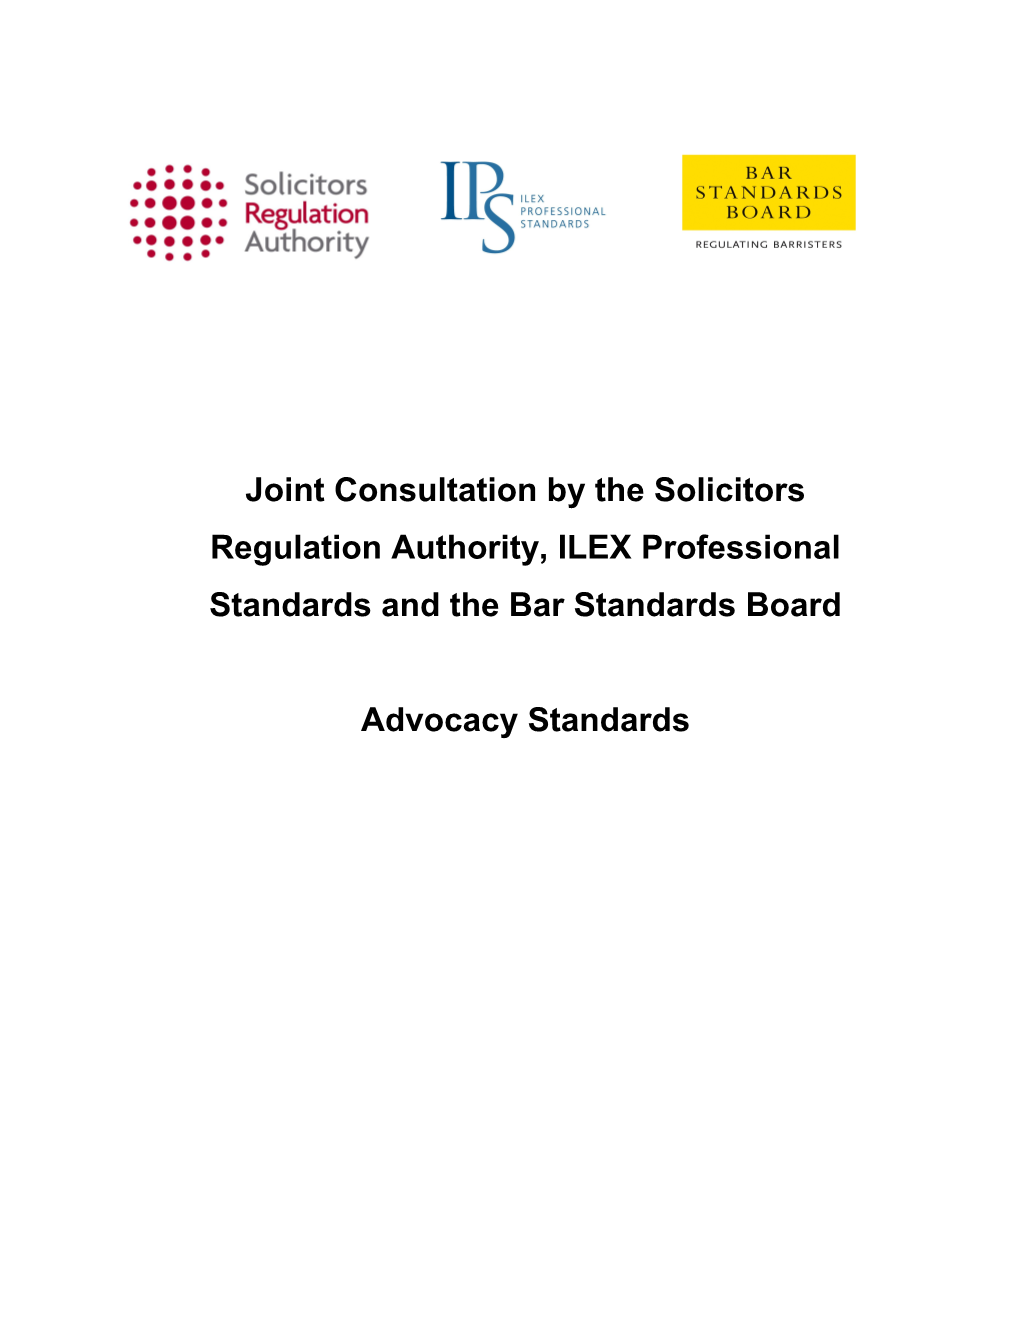 Joint Consultation by the Solicitors Regulation Authority, ILEX Professional Standards